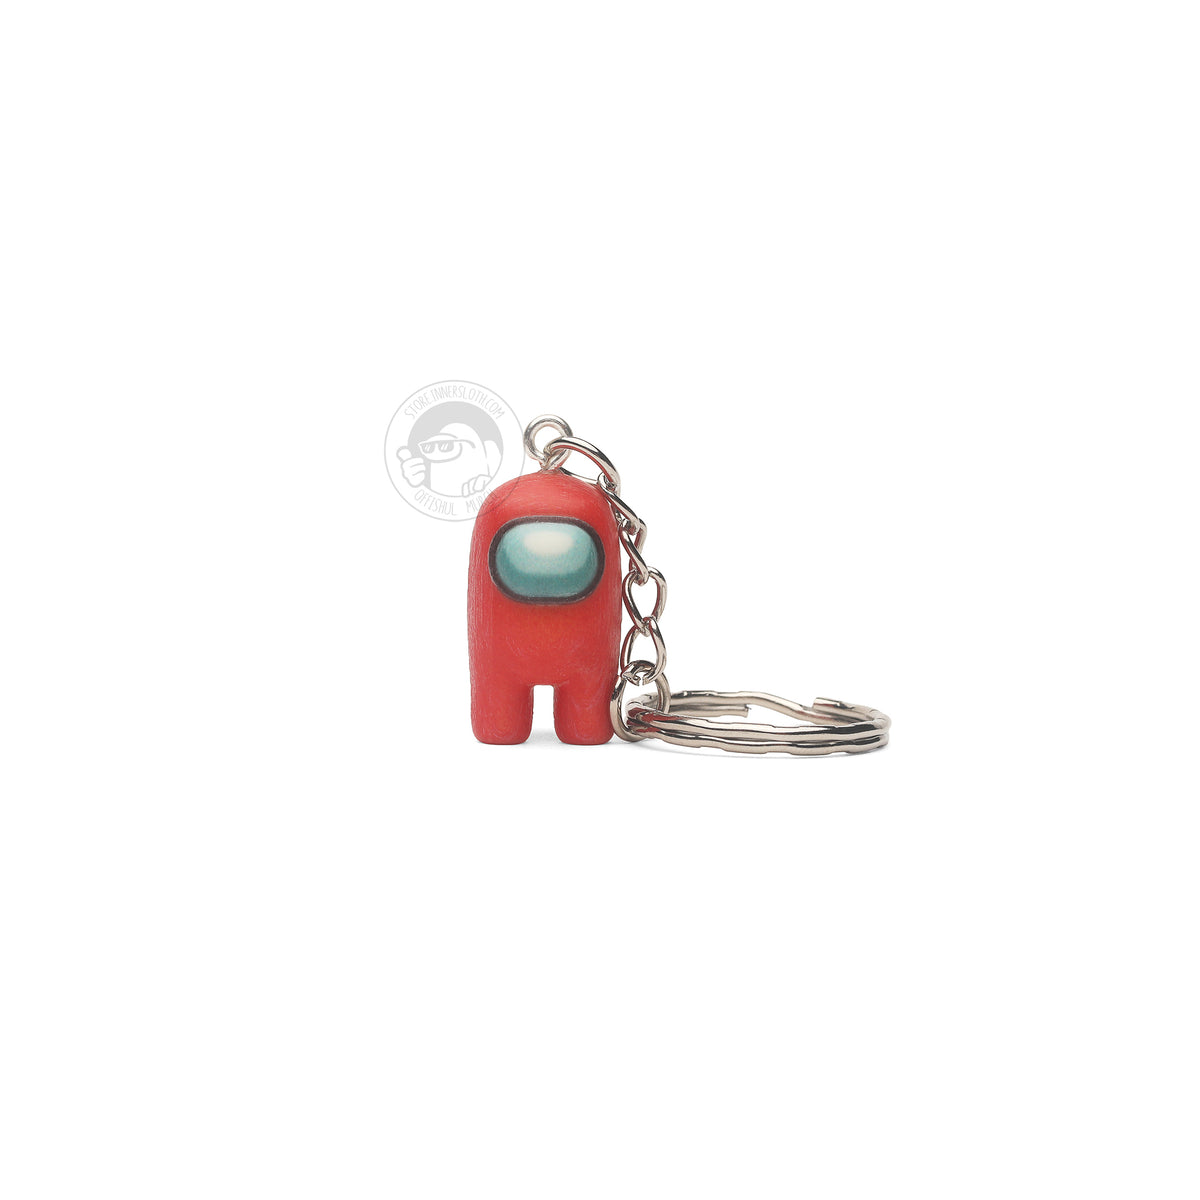 A product photo of the Among Us: Crewmate Keychain by Objex Unlimited Inc. in red. It is standing, and a silver keychain rests beside it.